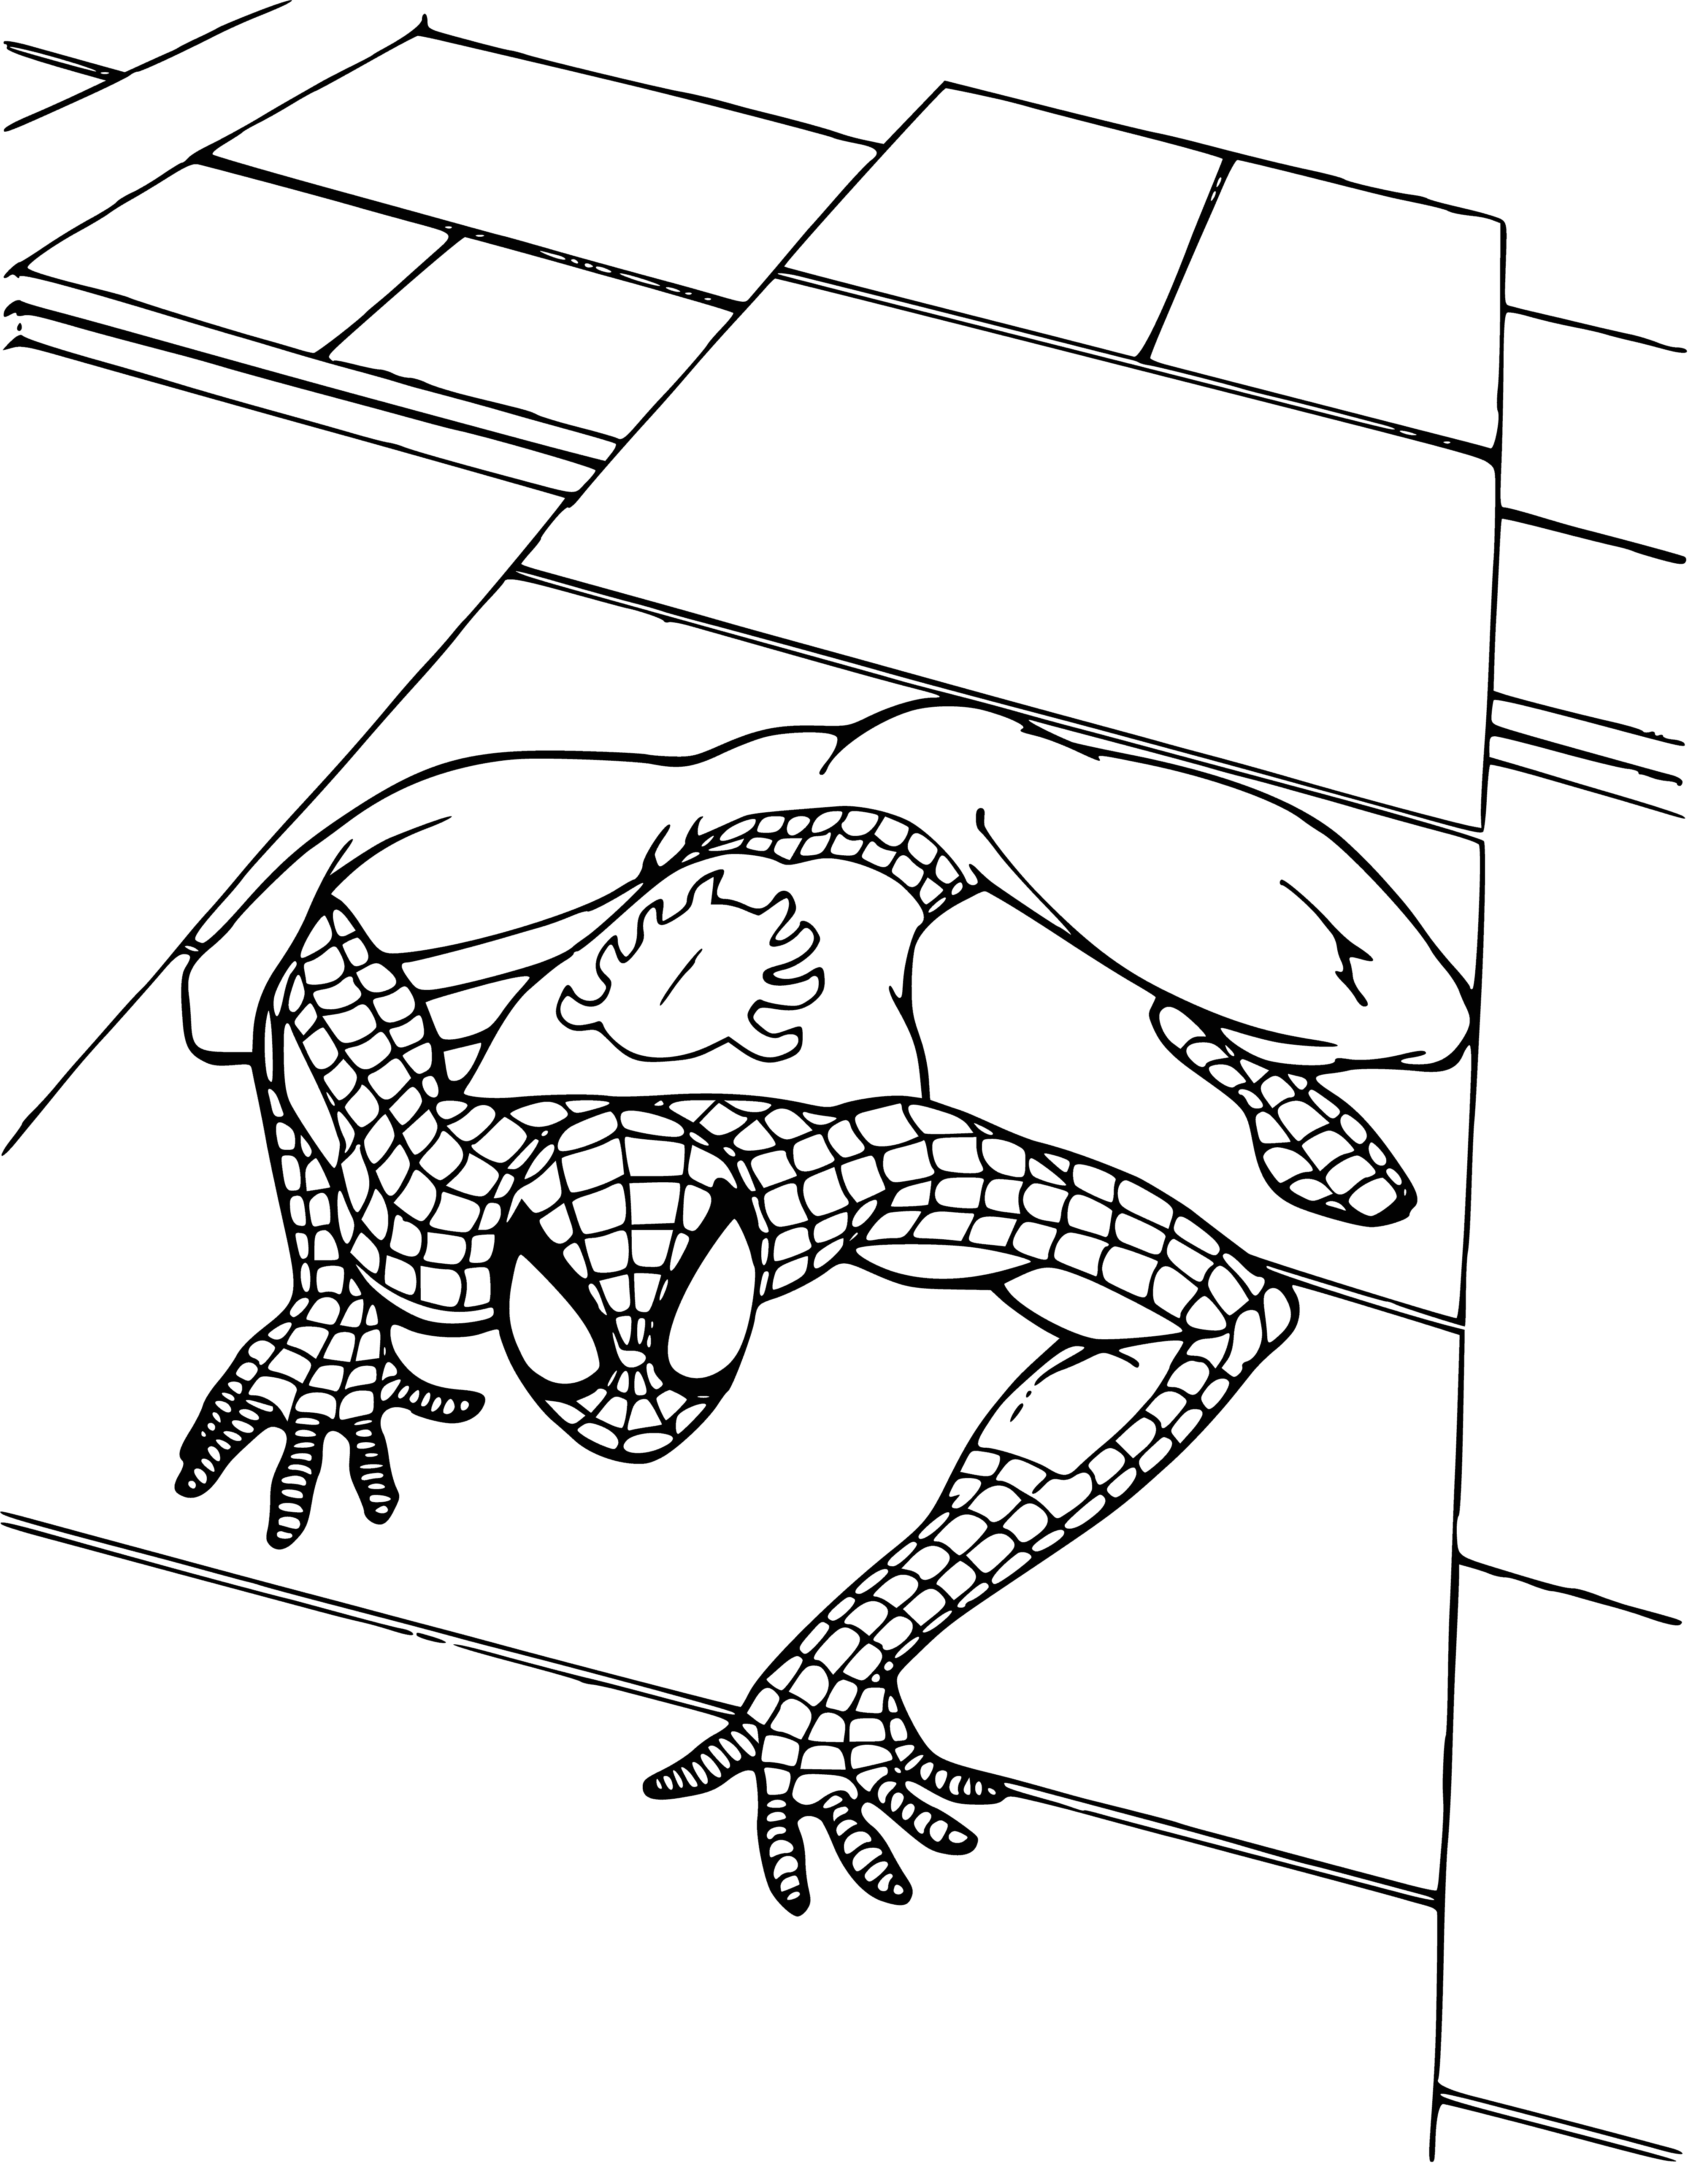 SpiderMan on the wall coloring page